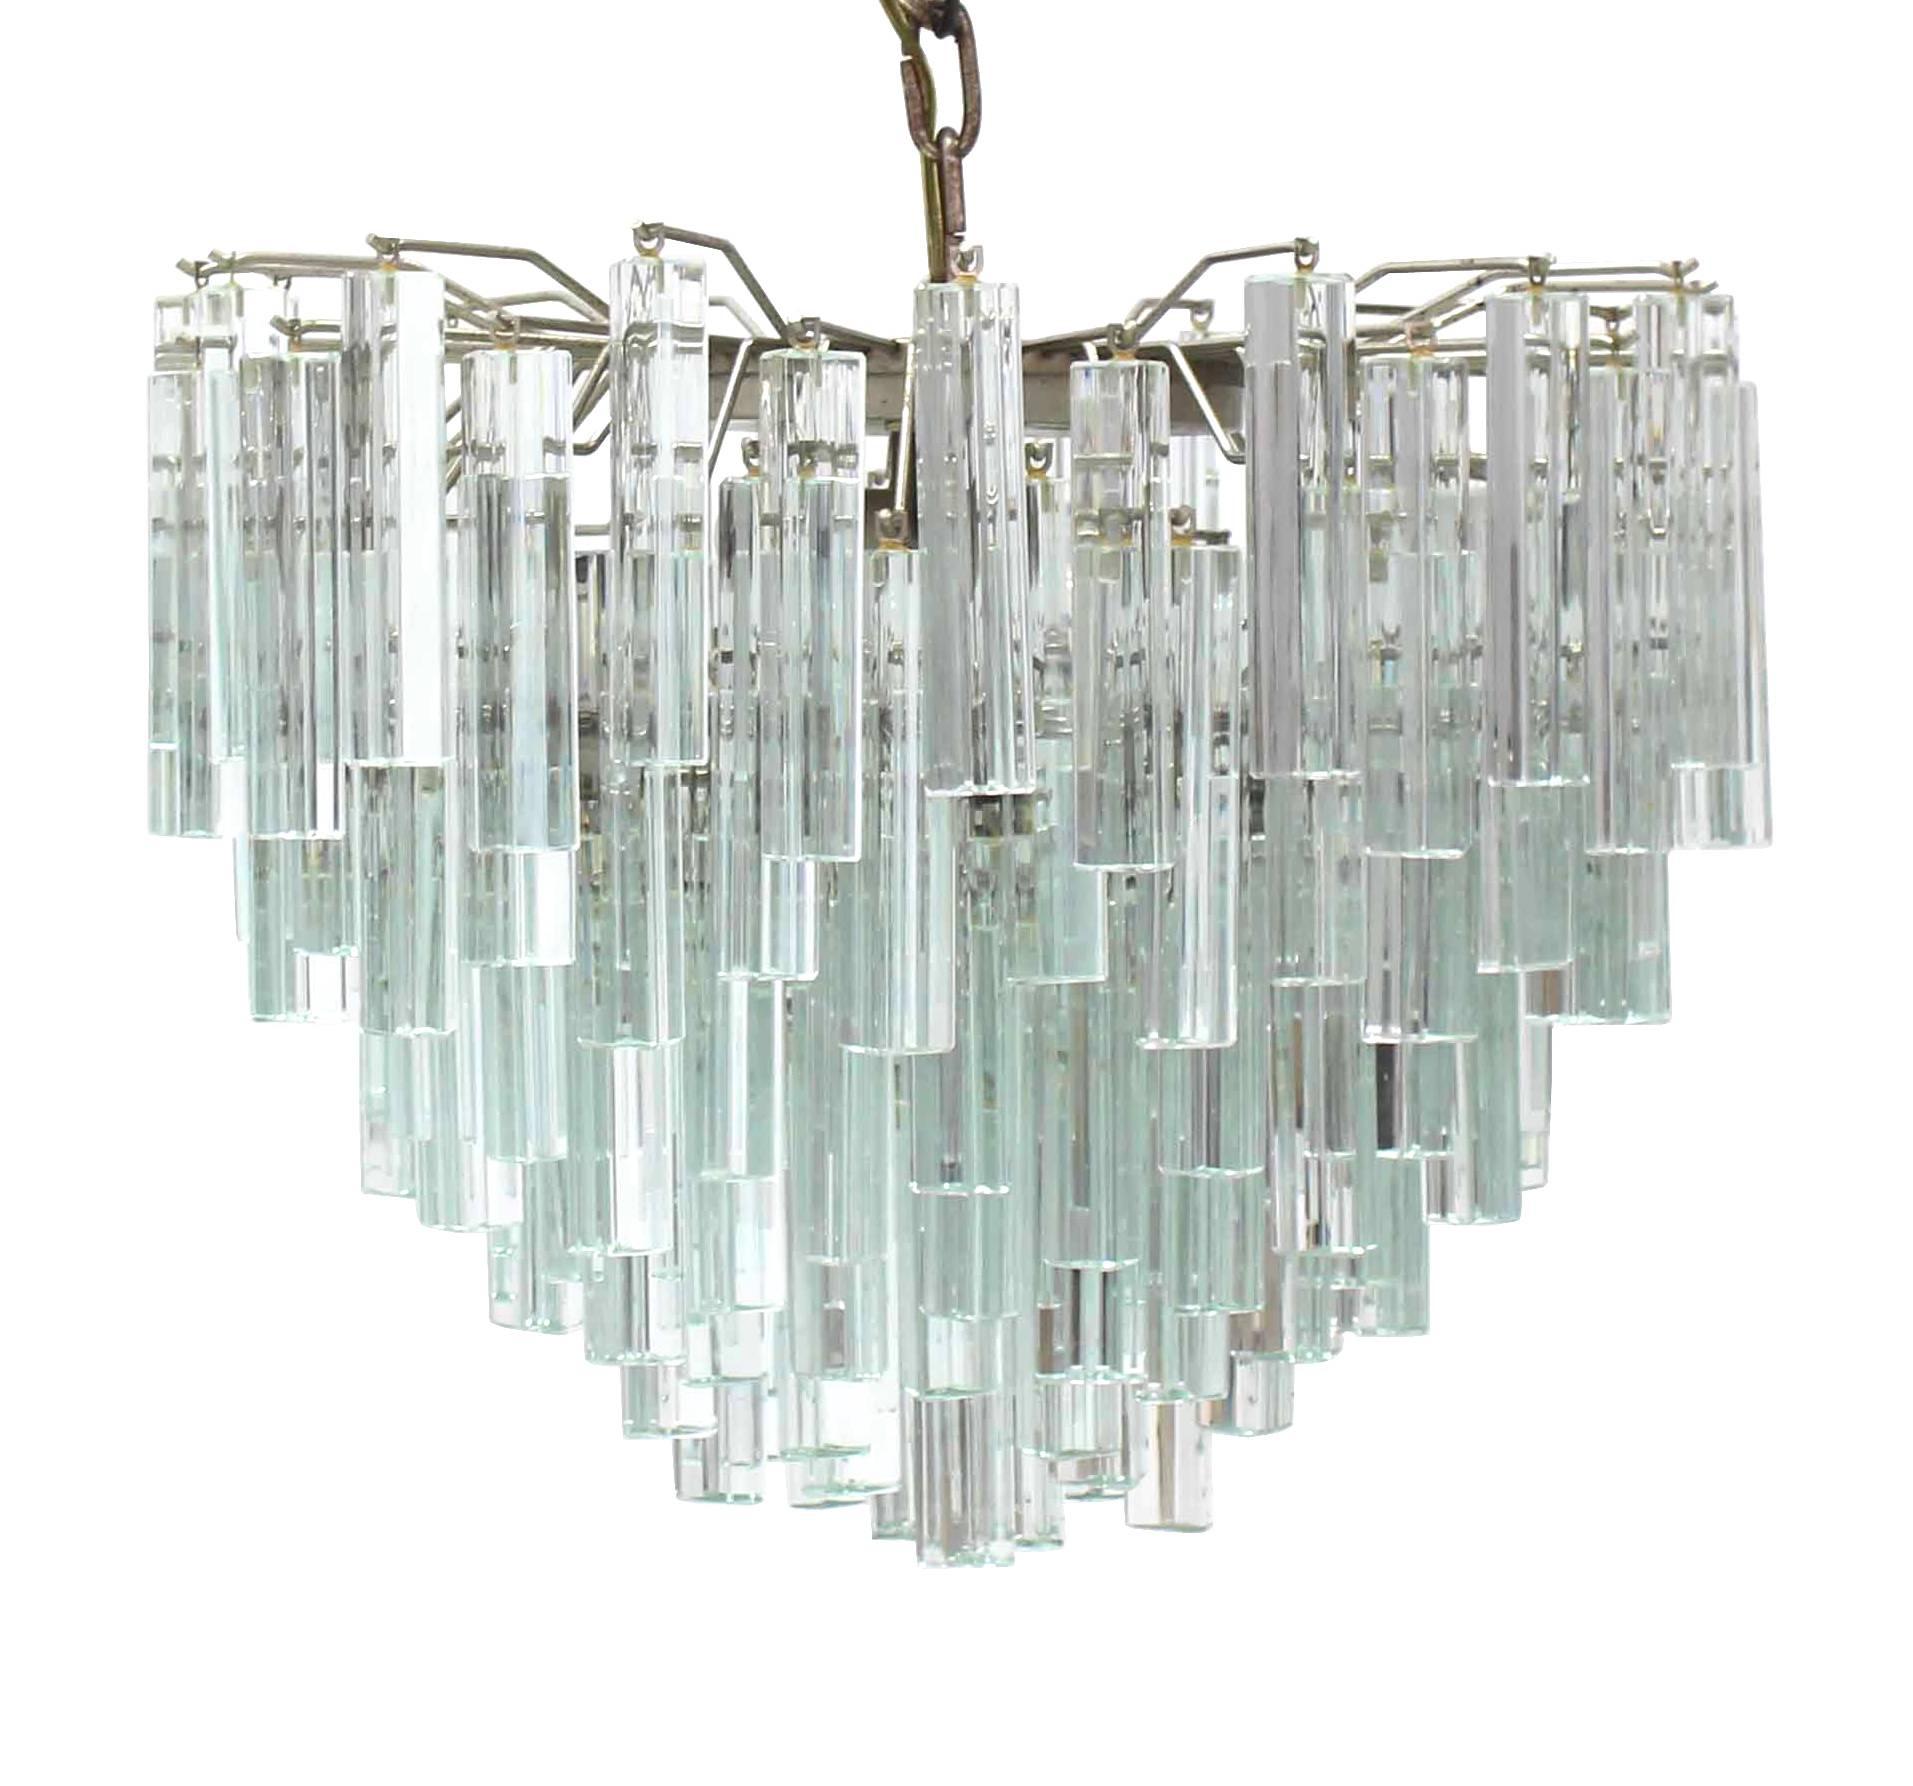 American Medium to Large Size Round Camer Chandelier For Sale